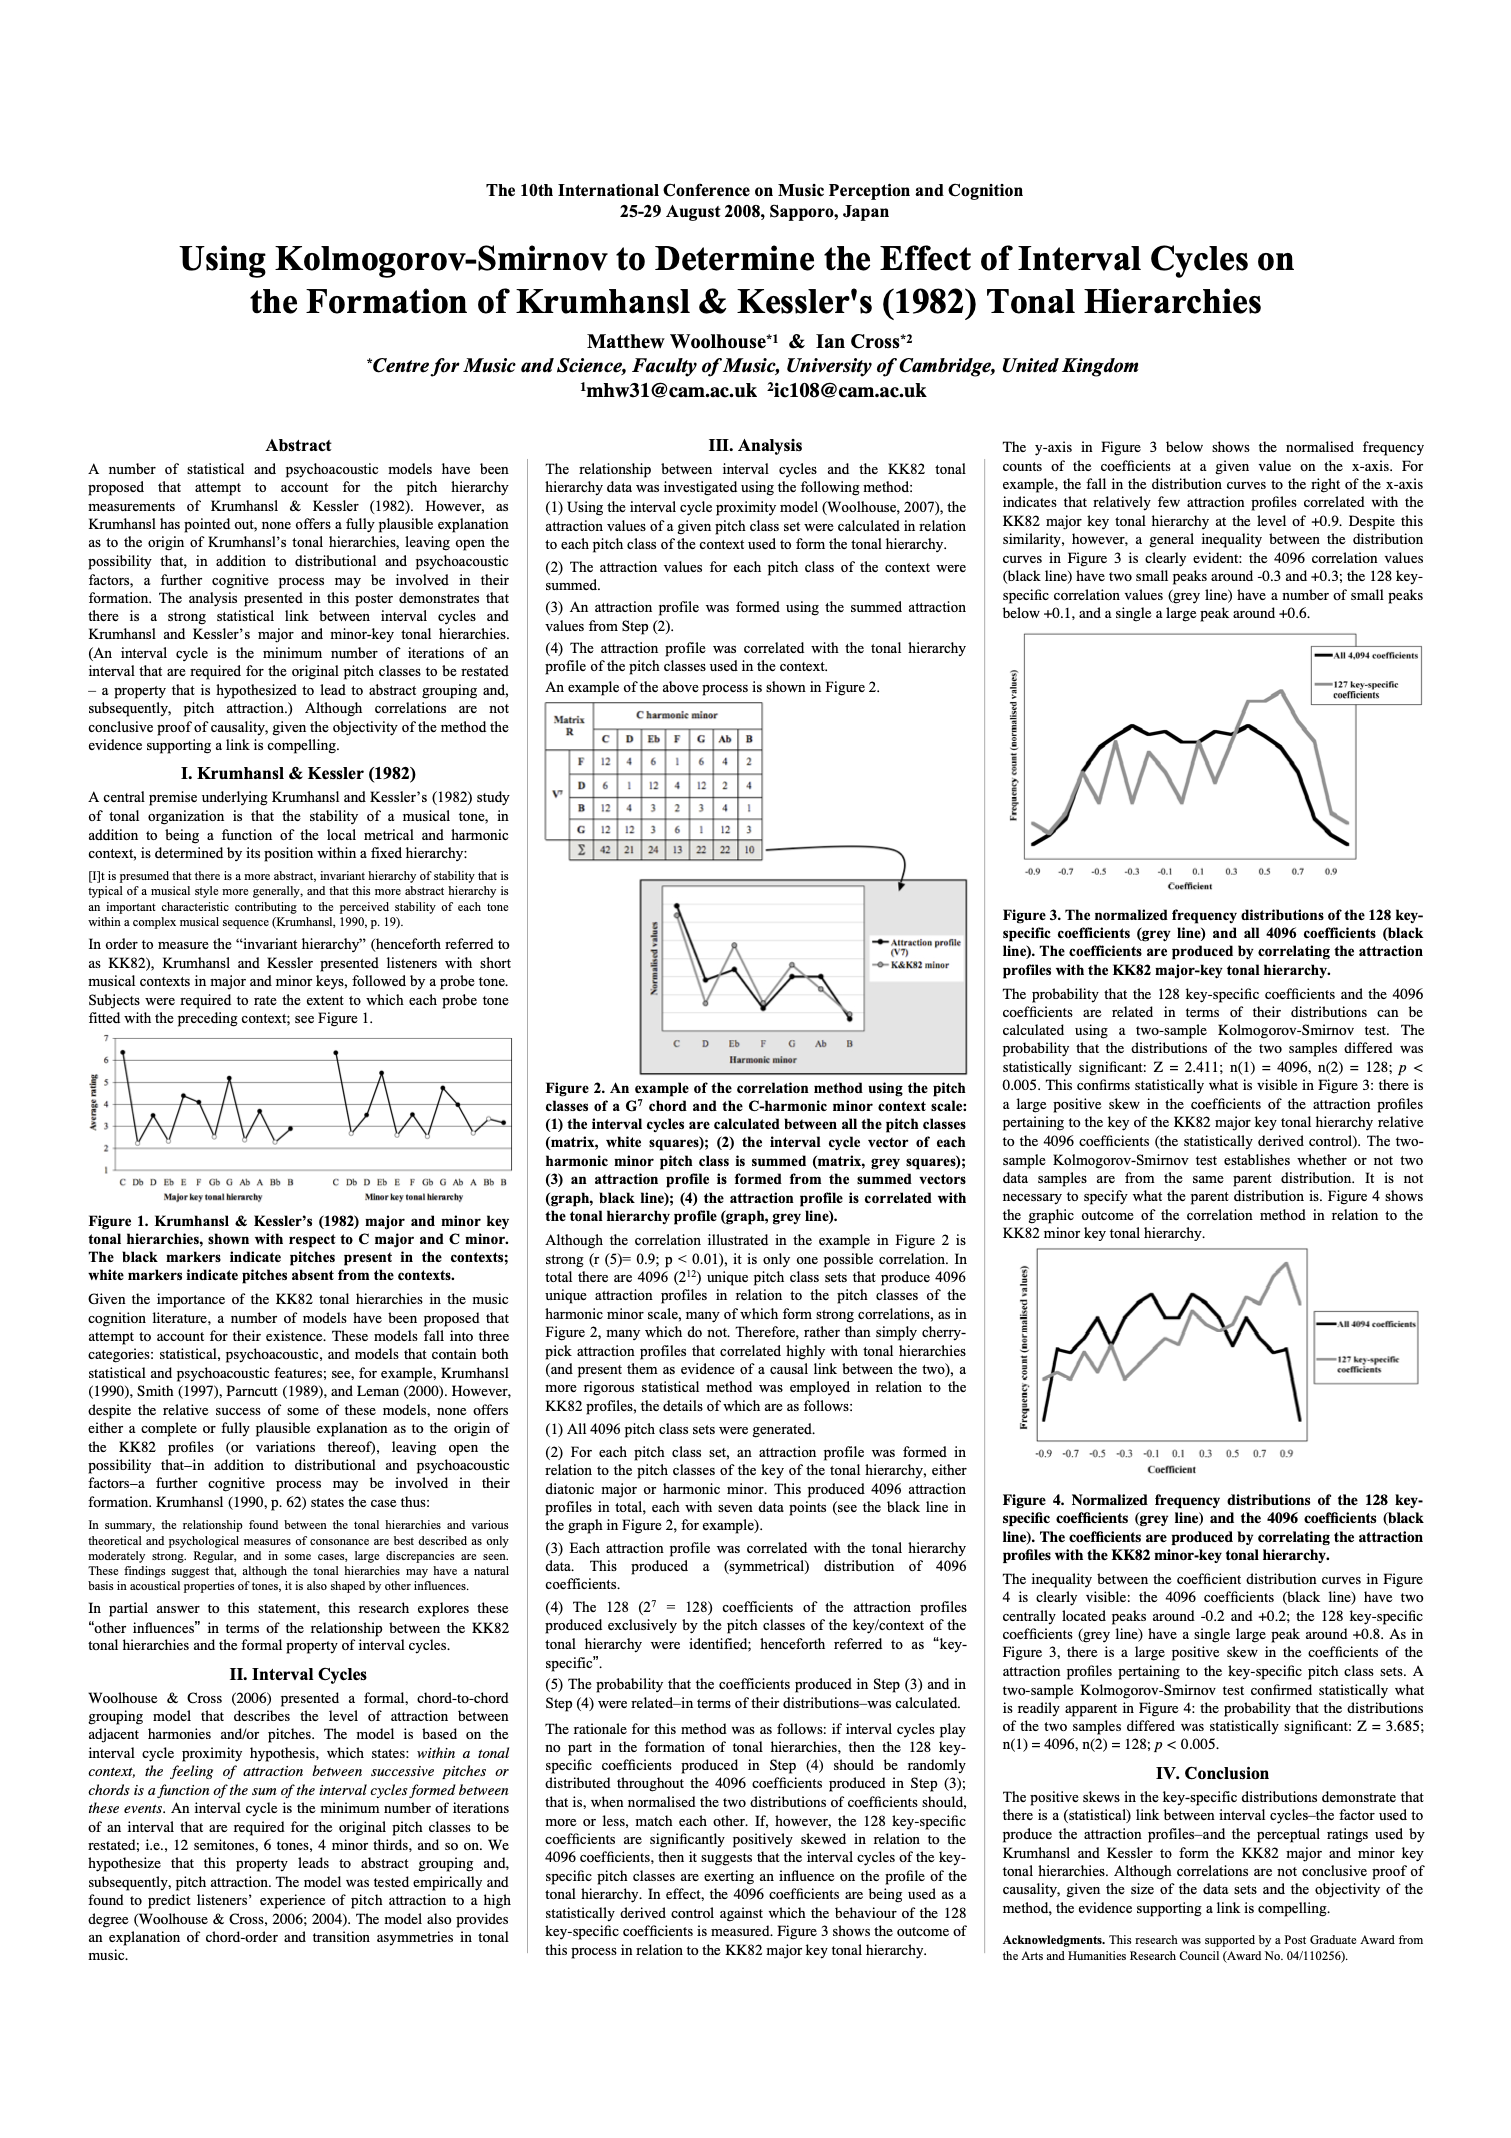 Poster for "Using Kolmogorov-Smirnov to Determine the Effect of Interval Cycles on the Formation of Krumhansl and Kessler's (1982) Tonal Hierarchies" by Matthew Woolhouse and Ian Cross.